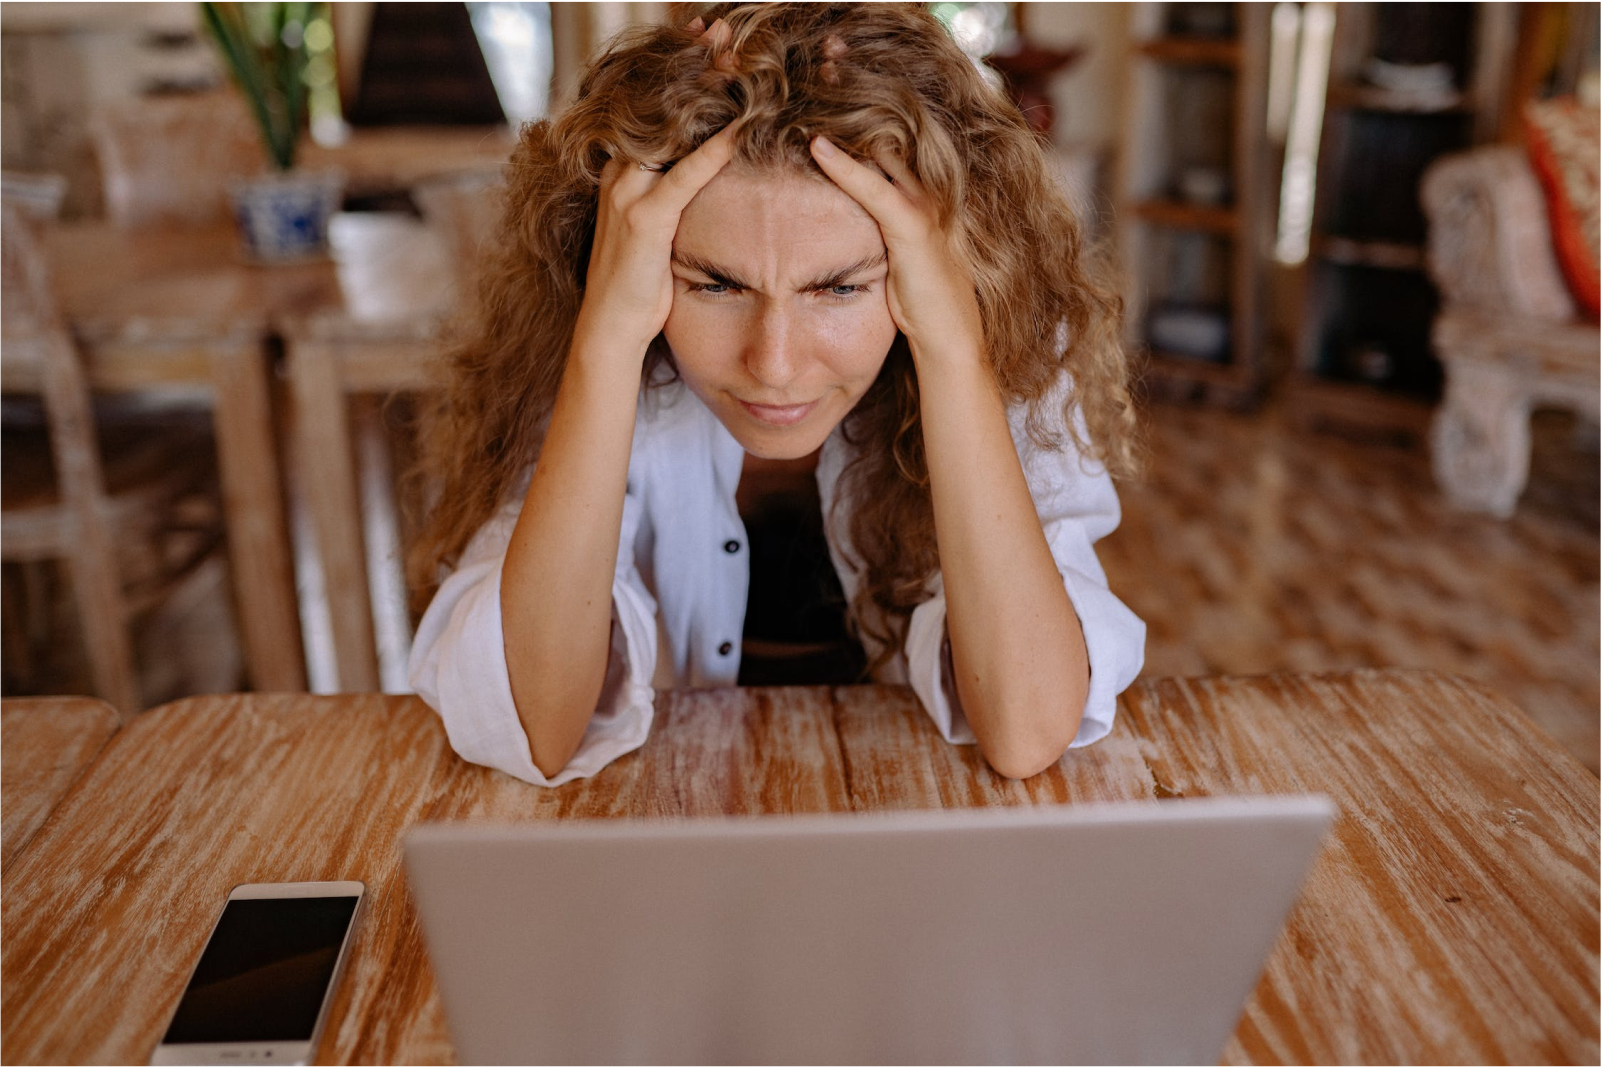 Cover image for blog post "Top 10 Pains of the Content Marketing Freelancer"